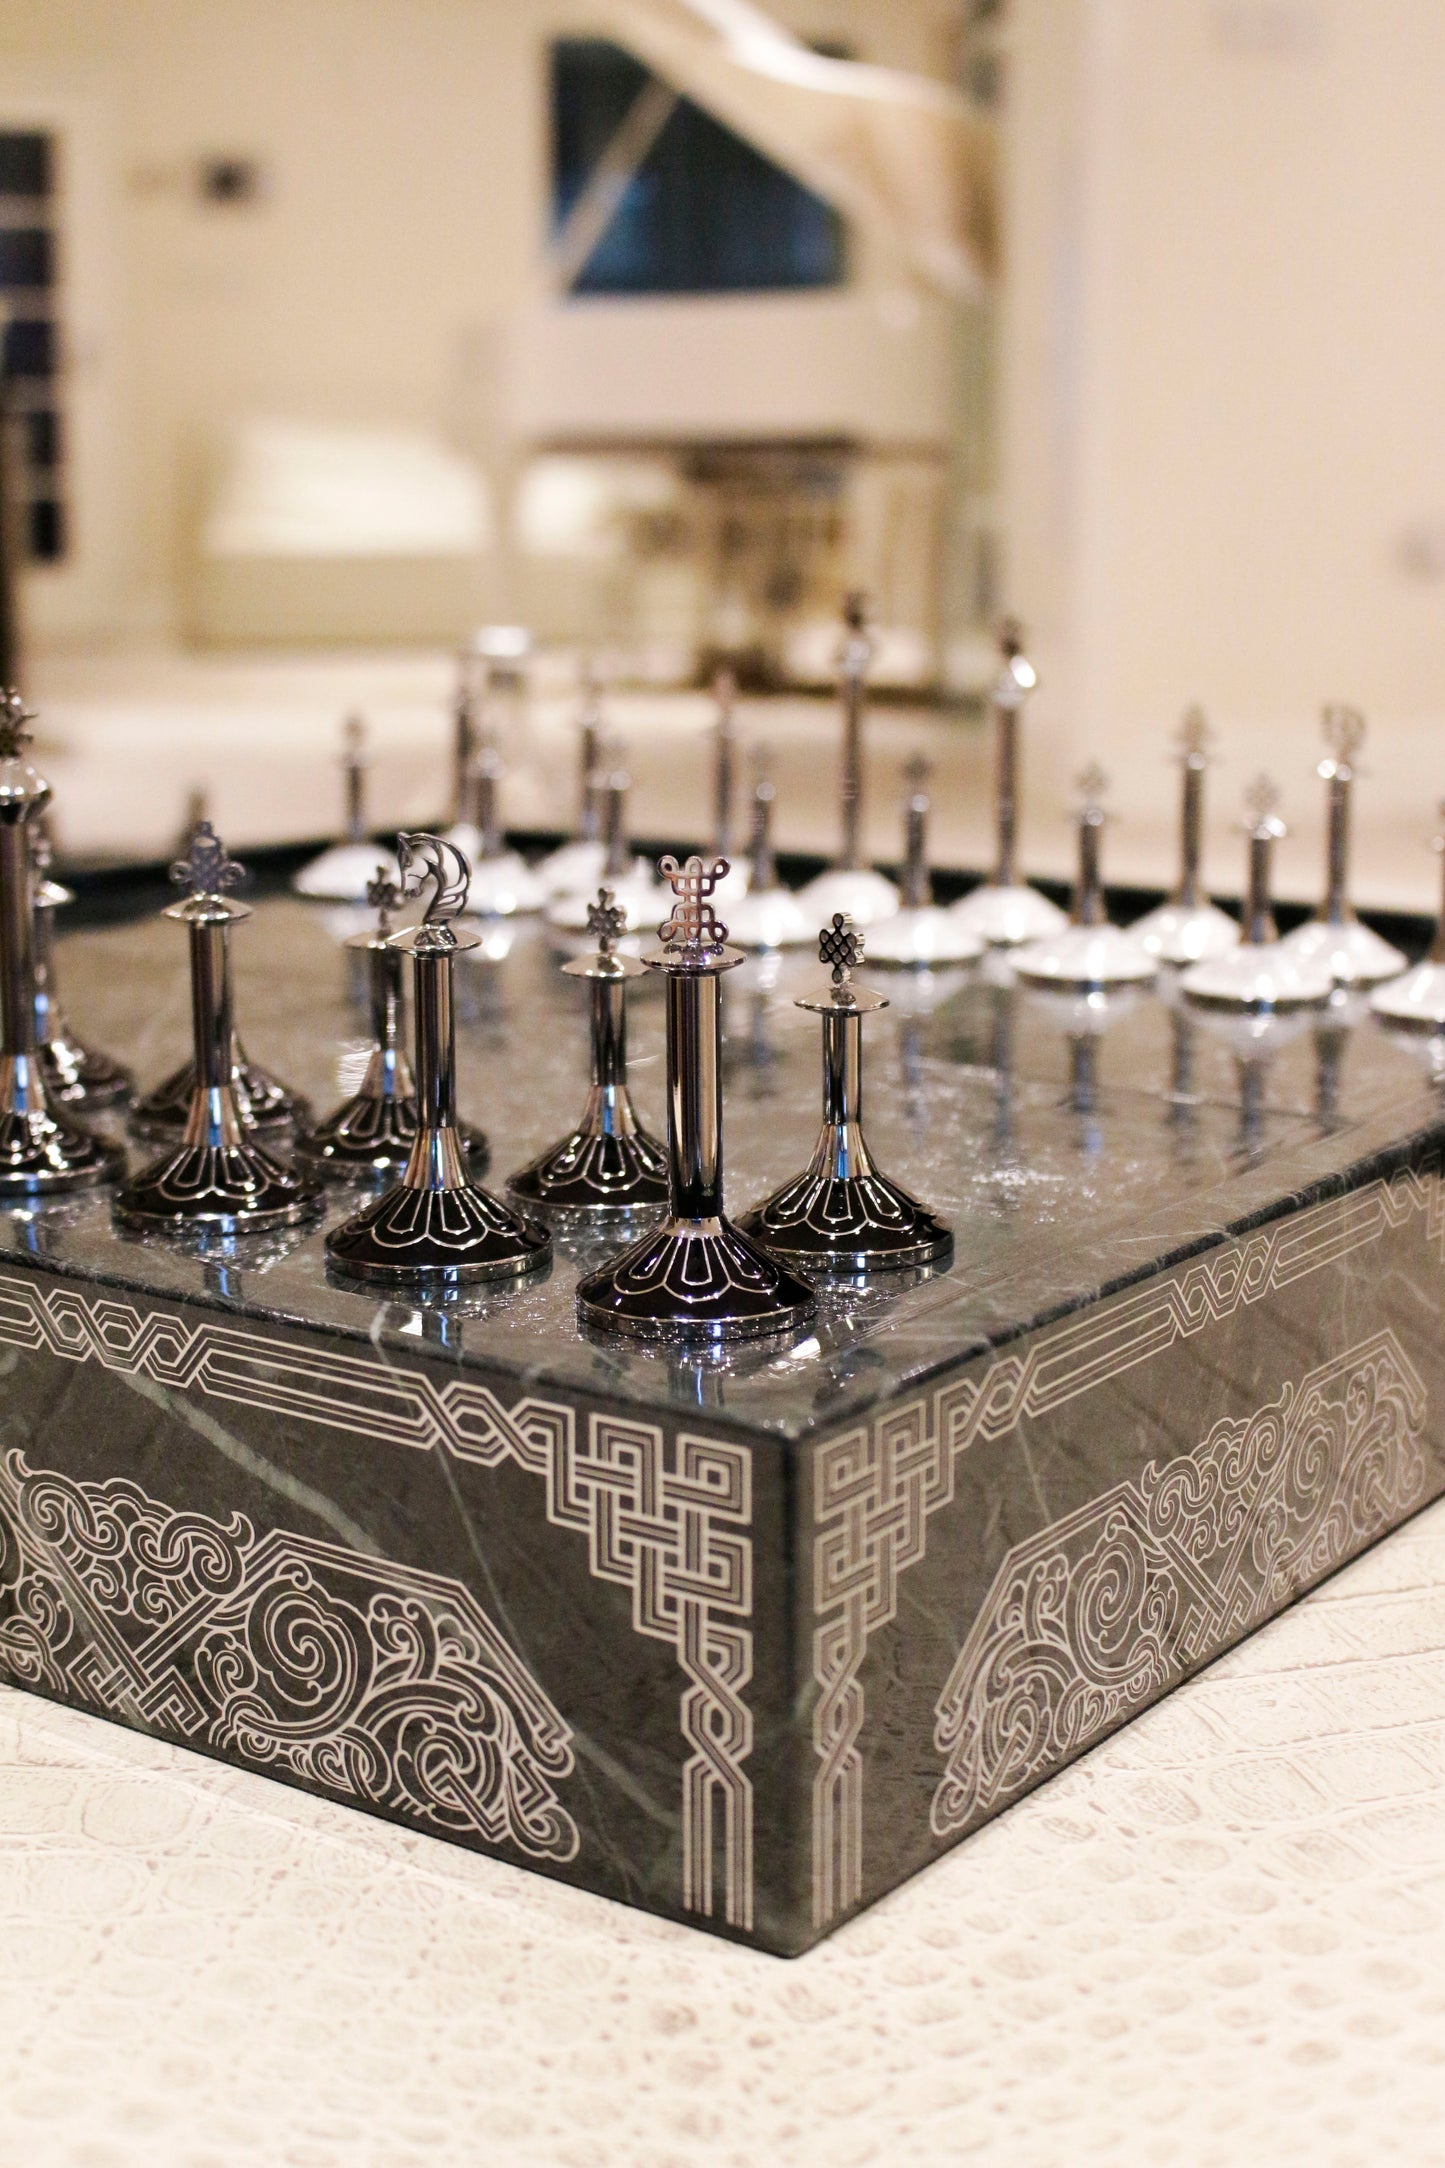 LIMITED EDITION Chess Set